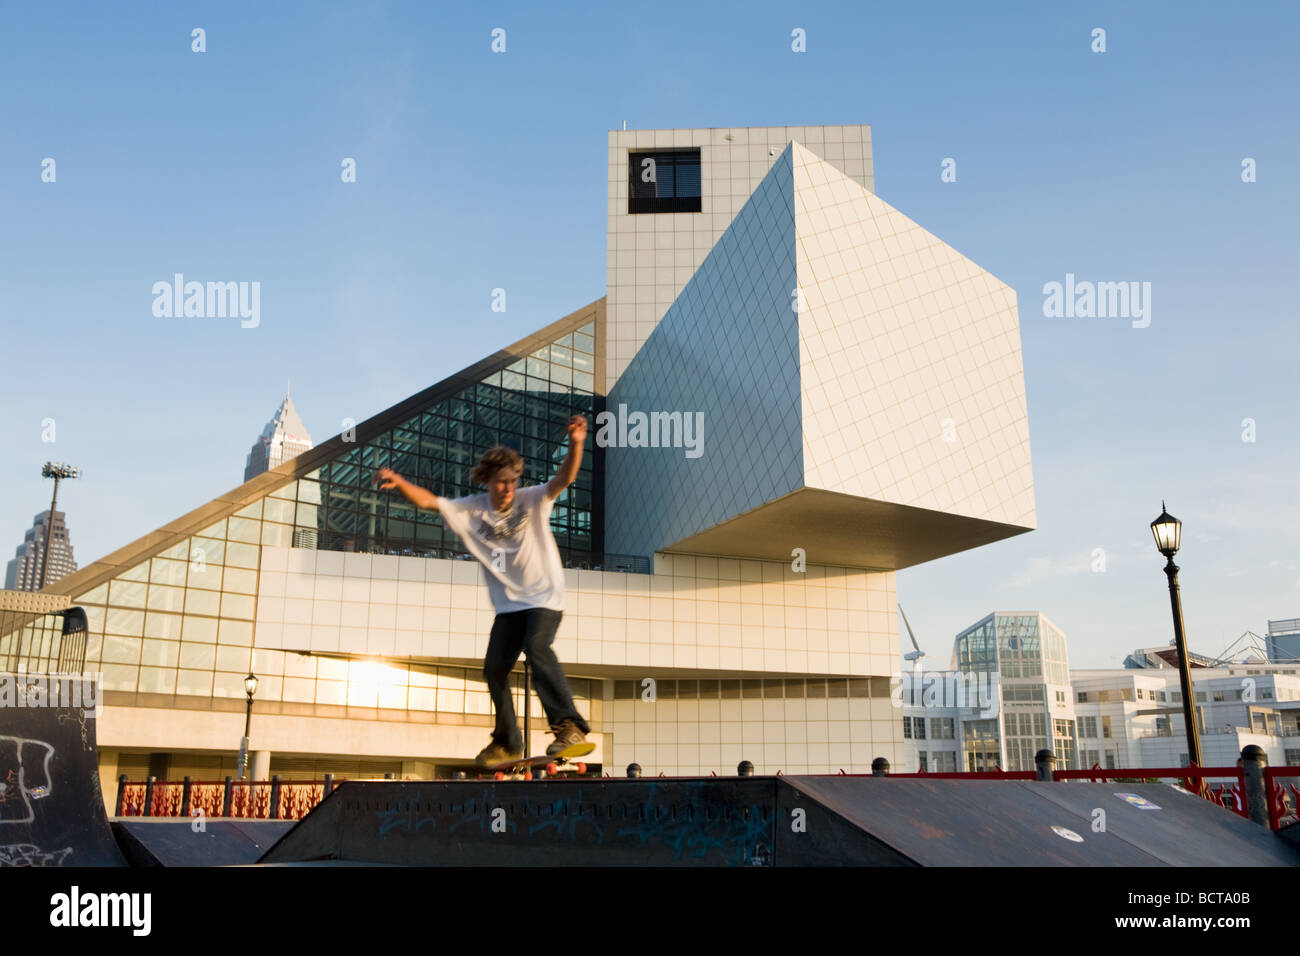 Skateboard-Park ist Teil des Rock And Roll Hall Of Fame von I M Pei in Cleveland Ohio Stockfoto